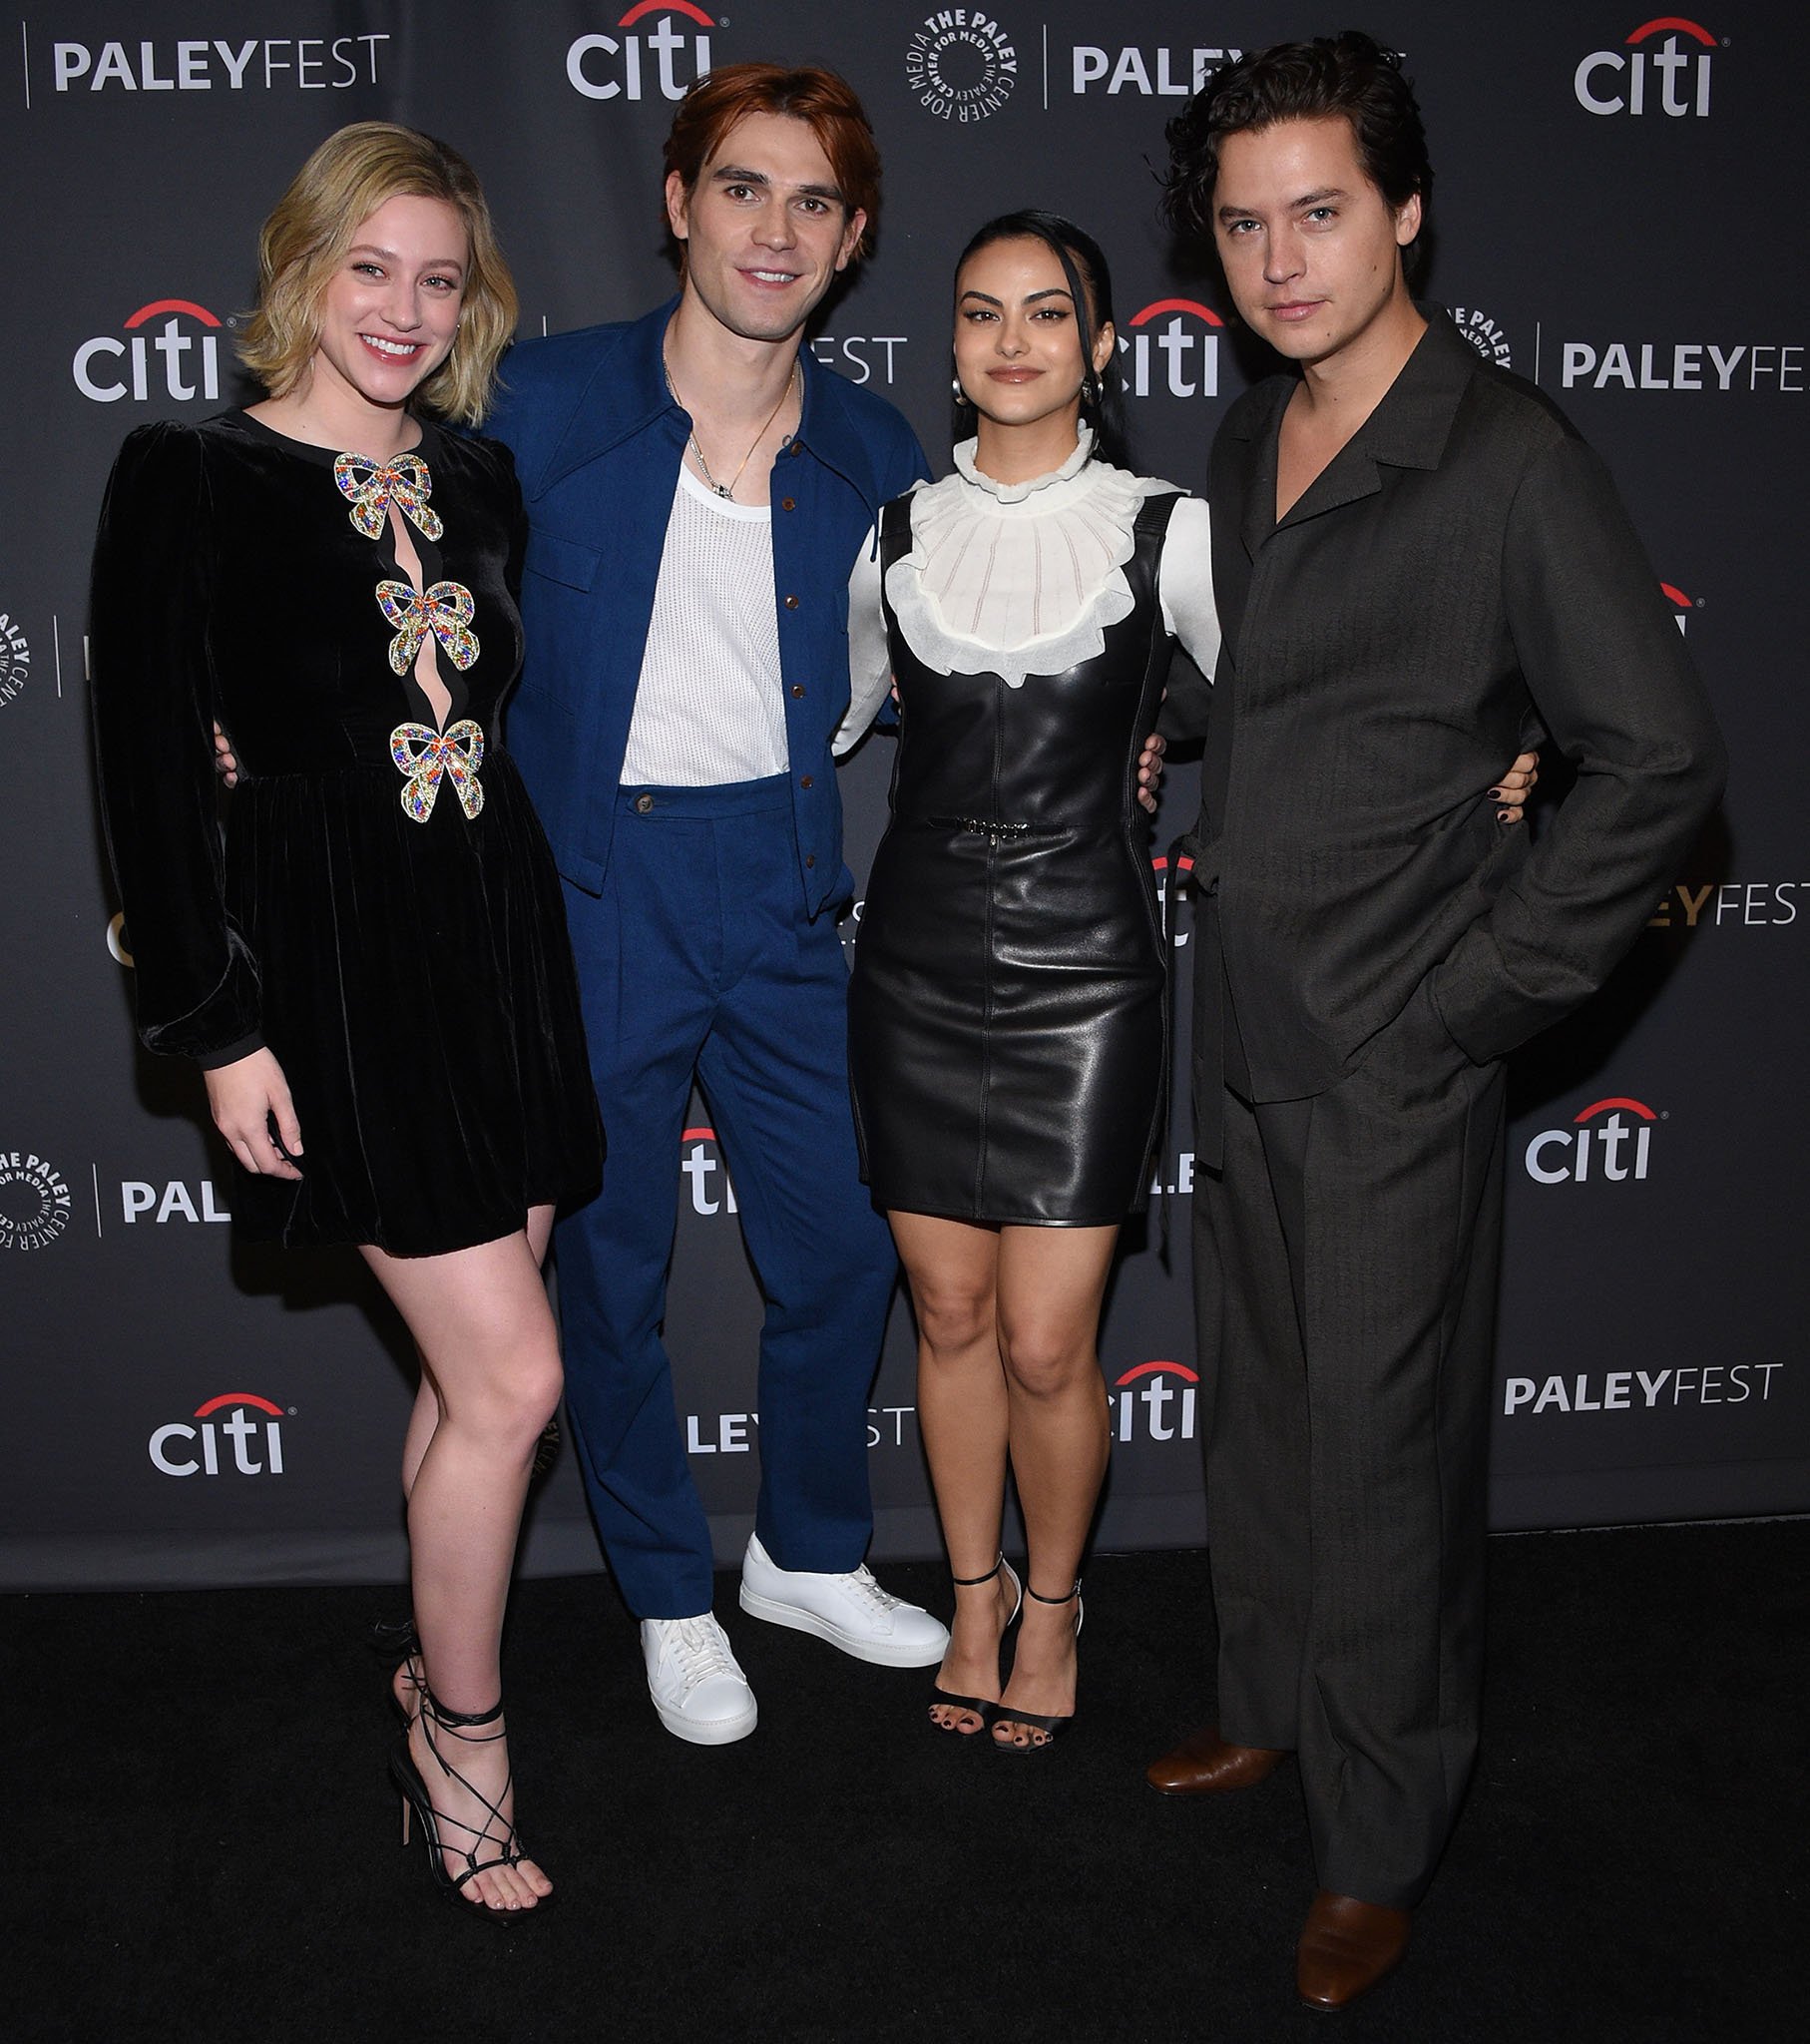 Lili Reinhart, KJ Apa, Camila Mendes, and Cole Sprouse pose together before the Riverdale panel during the 2022 PaleyFest